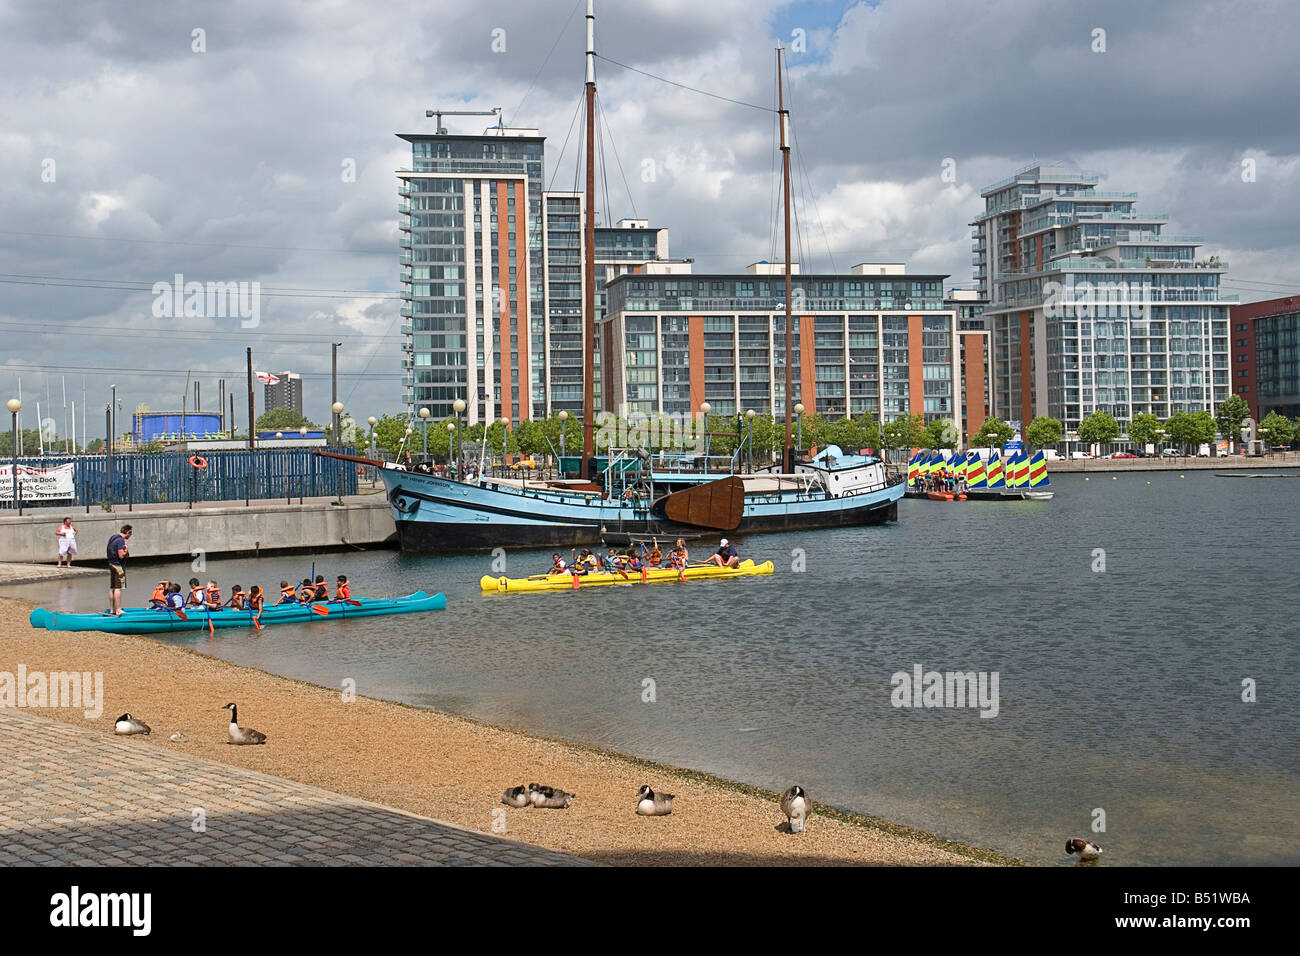 Children learning the basics of canoeing at Royal Victoria Dock Watersports Centre in east London UK Stock Photo